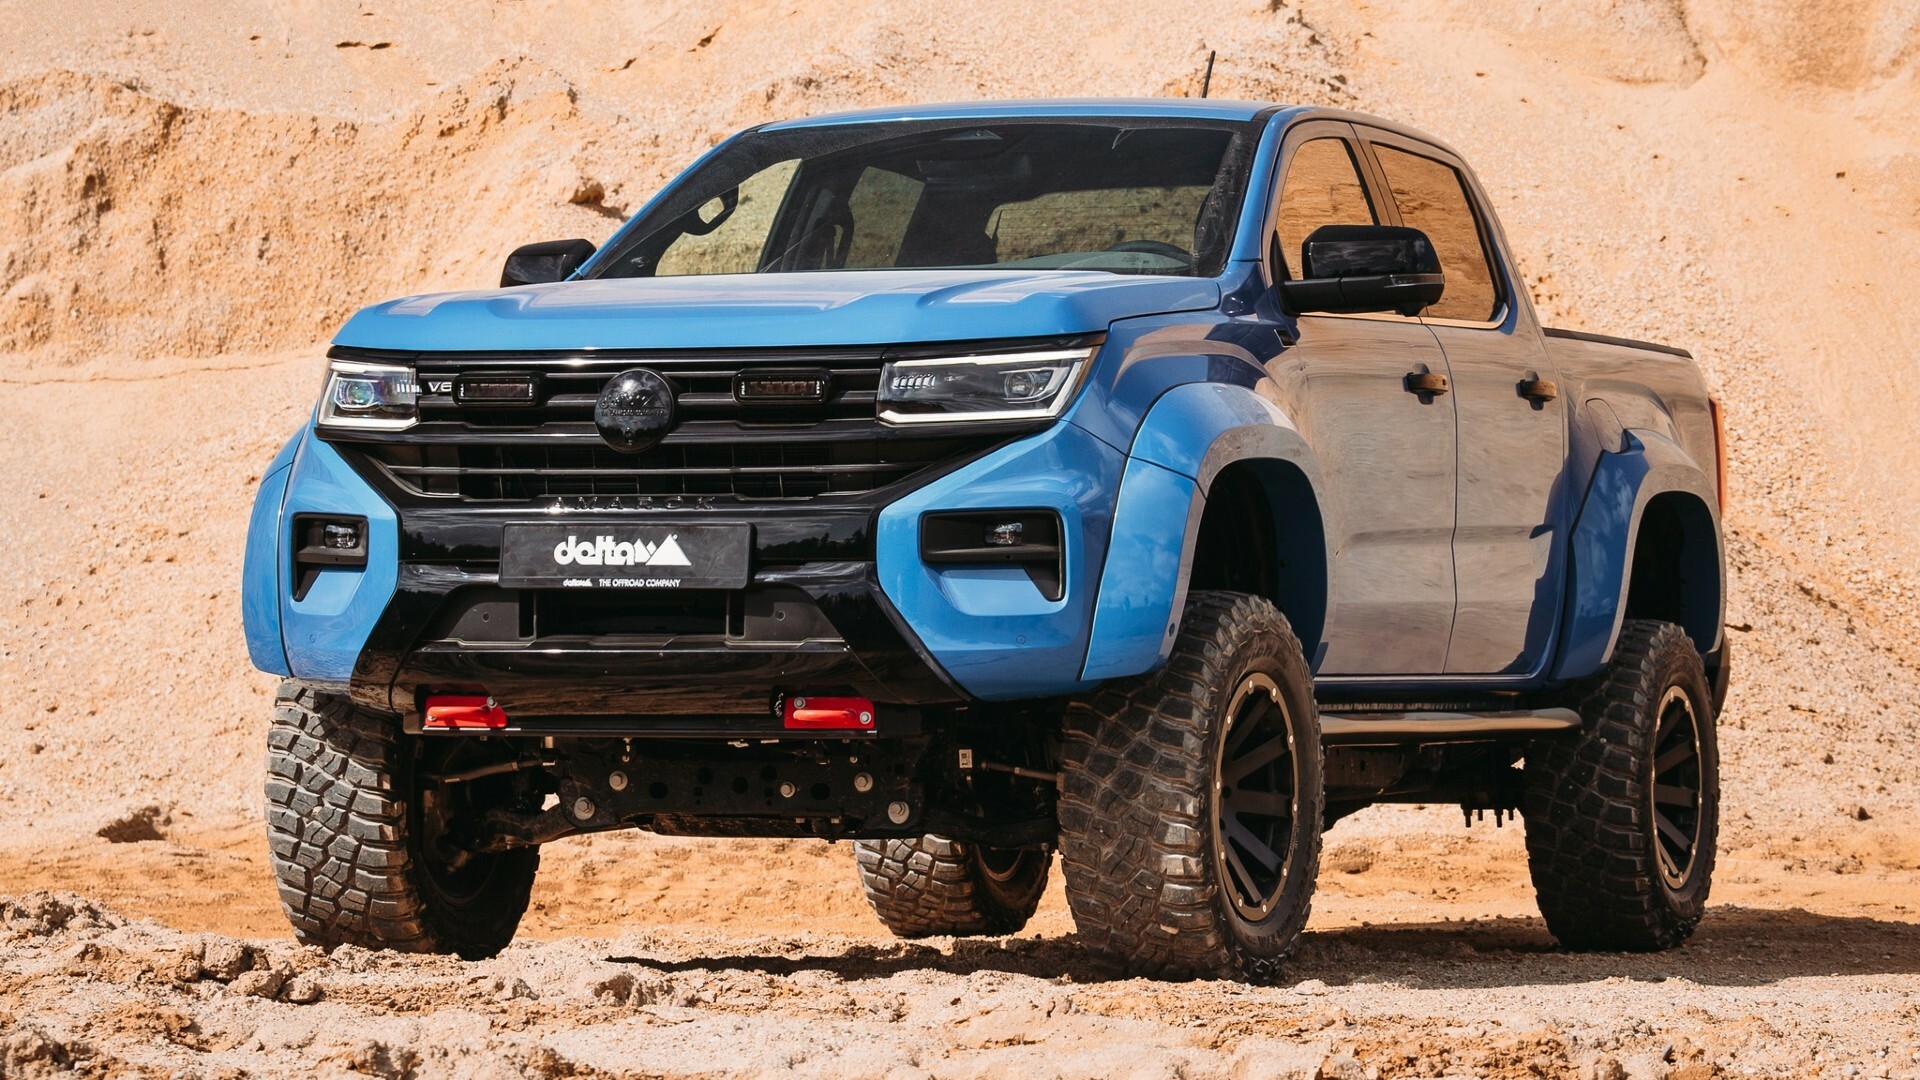 VW Amarok Enters Beast Mode With Wide Fenders And Massive Ground Clearance